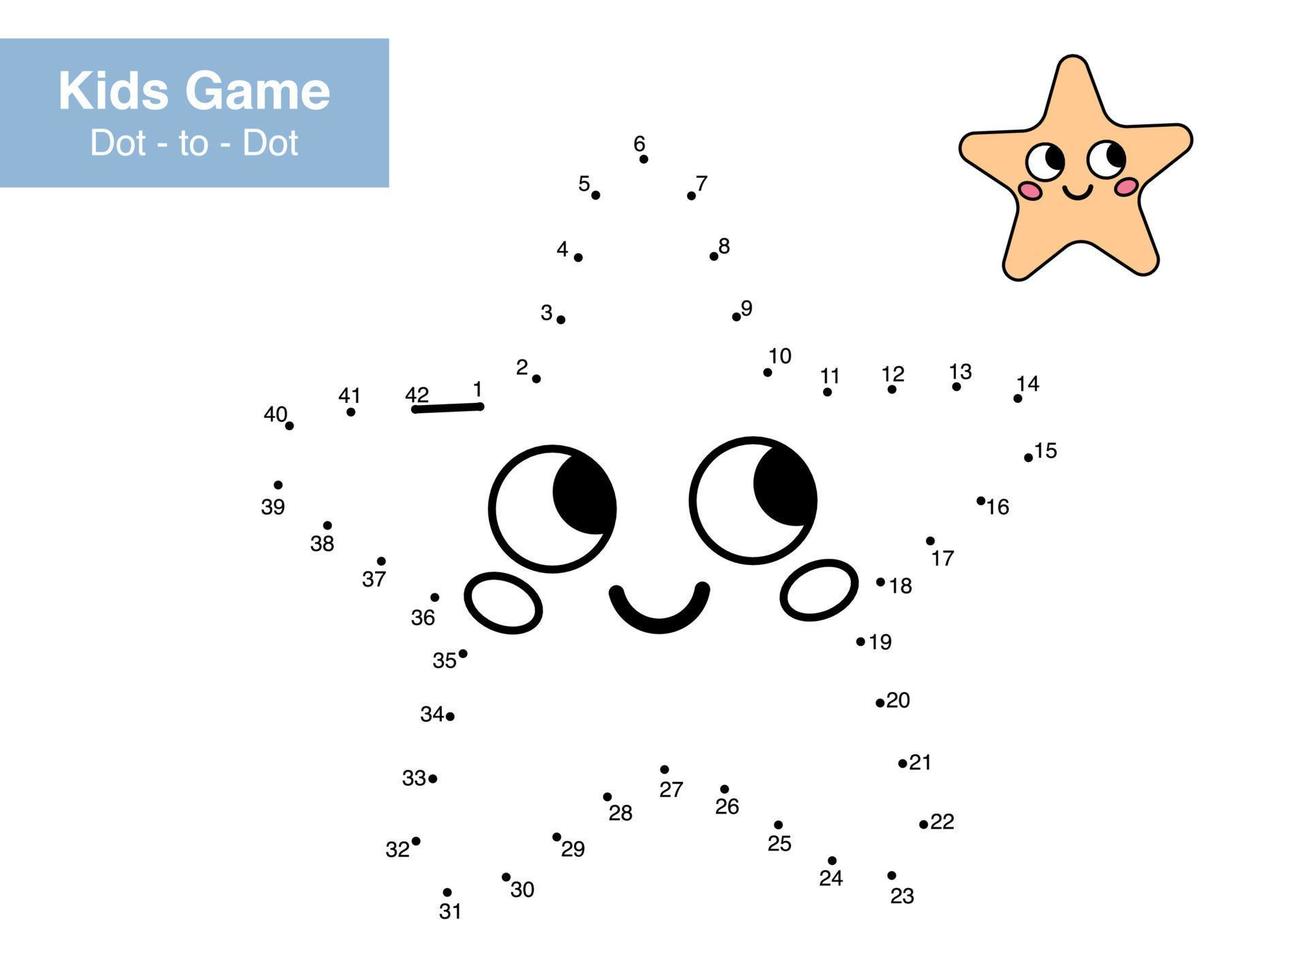 Dot to dot educational game for children. Cute cartoon starfish. Numbers game. Activity worksheet for kids. Connect the dots and color. Vector illustration